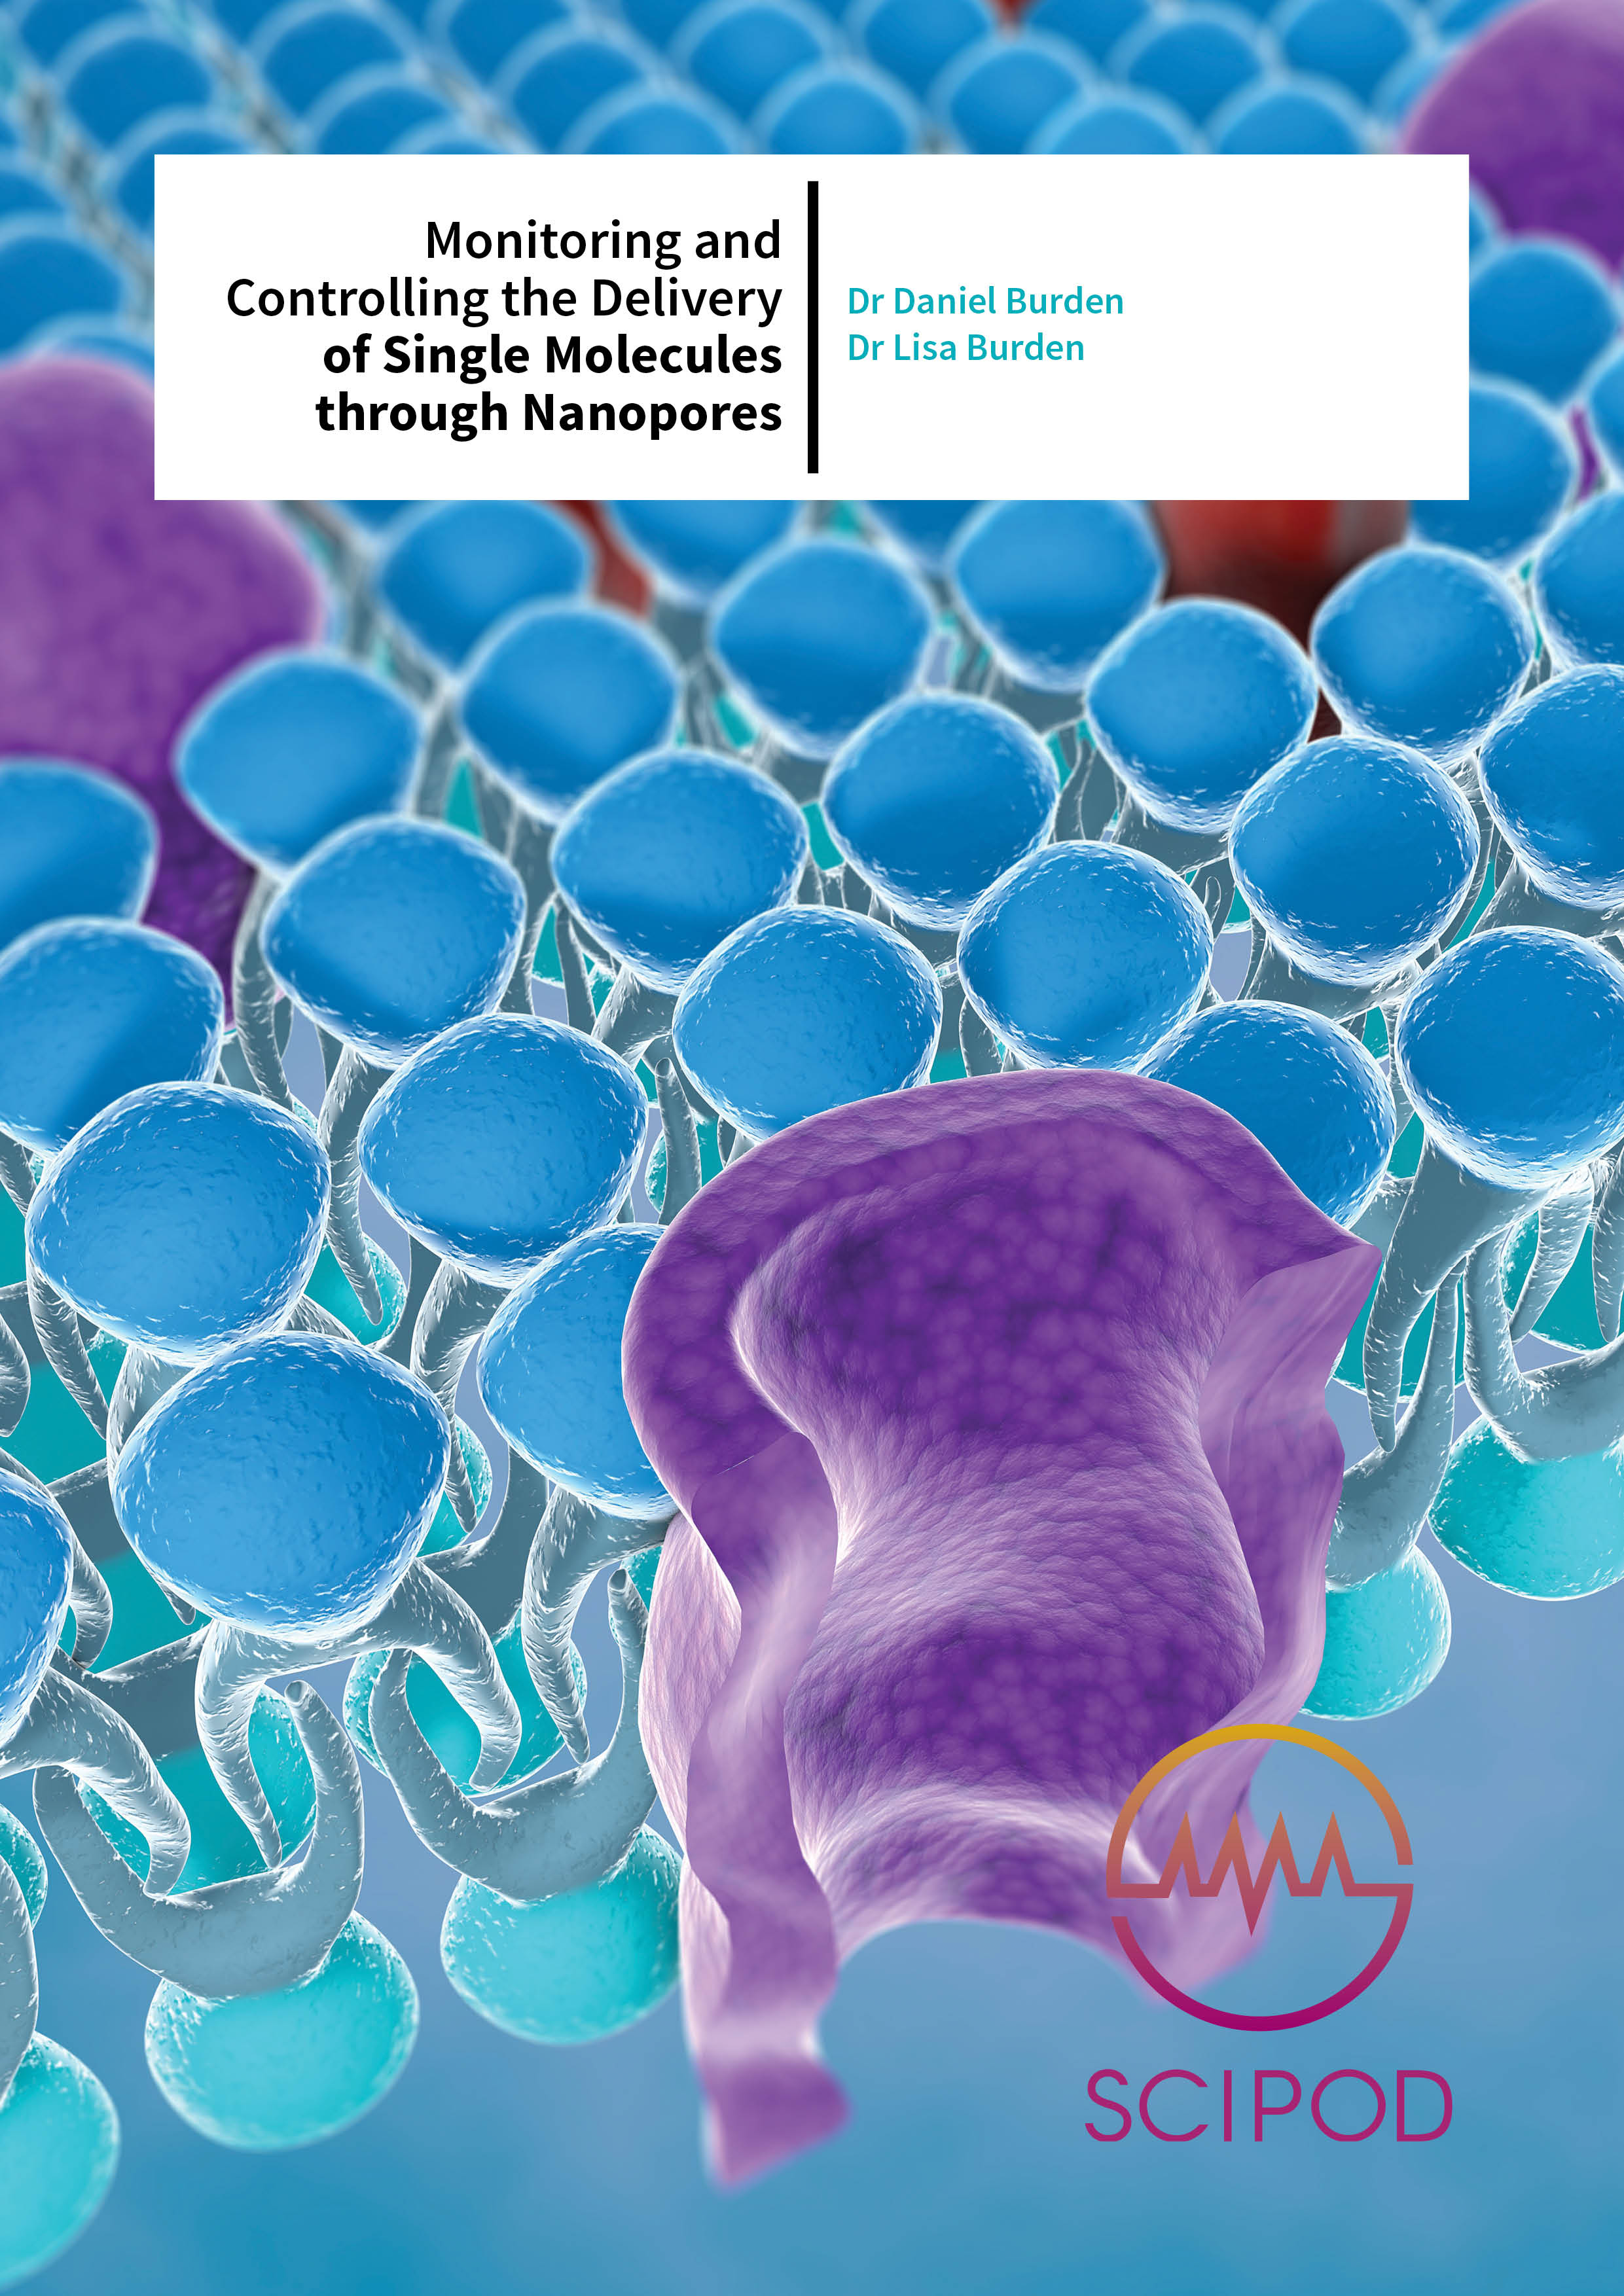 Monitoring and Controlling the Delivery of Single Molecules through Nanopores – Drs Daniel Burden and Lisa Burden, Wheaton College